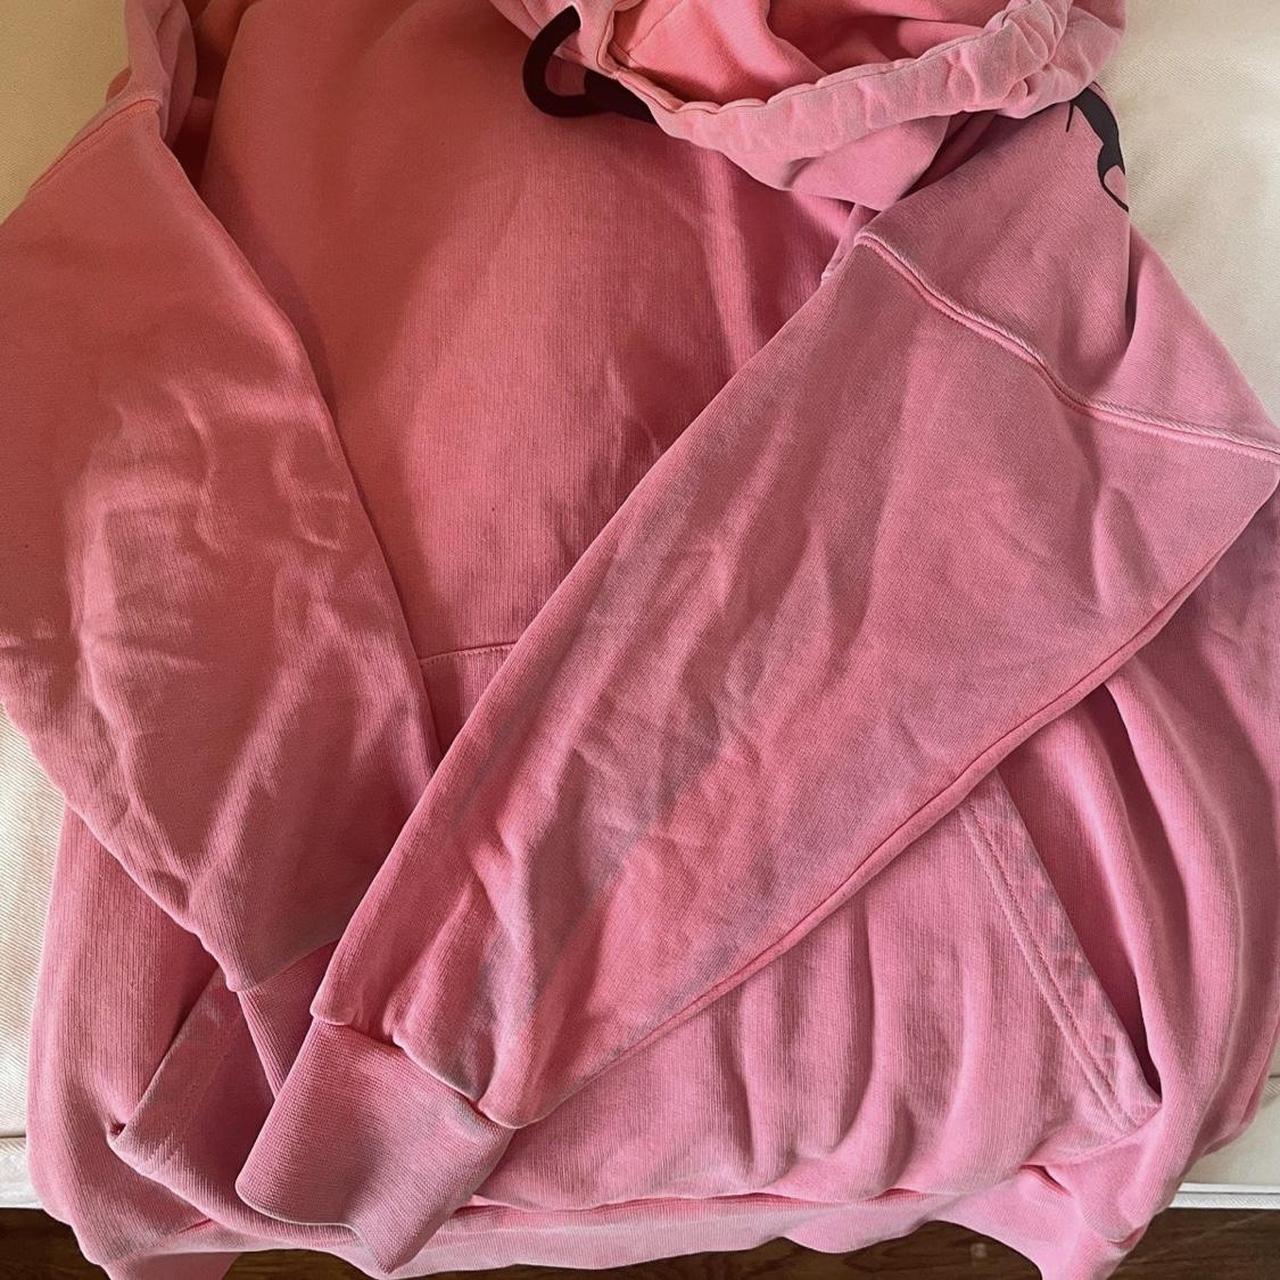 Product Image 4 - Palm angels pink oversized hoodie
Runs